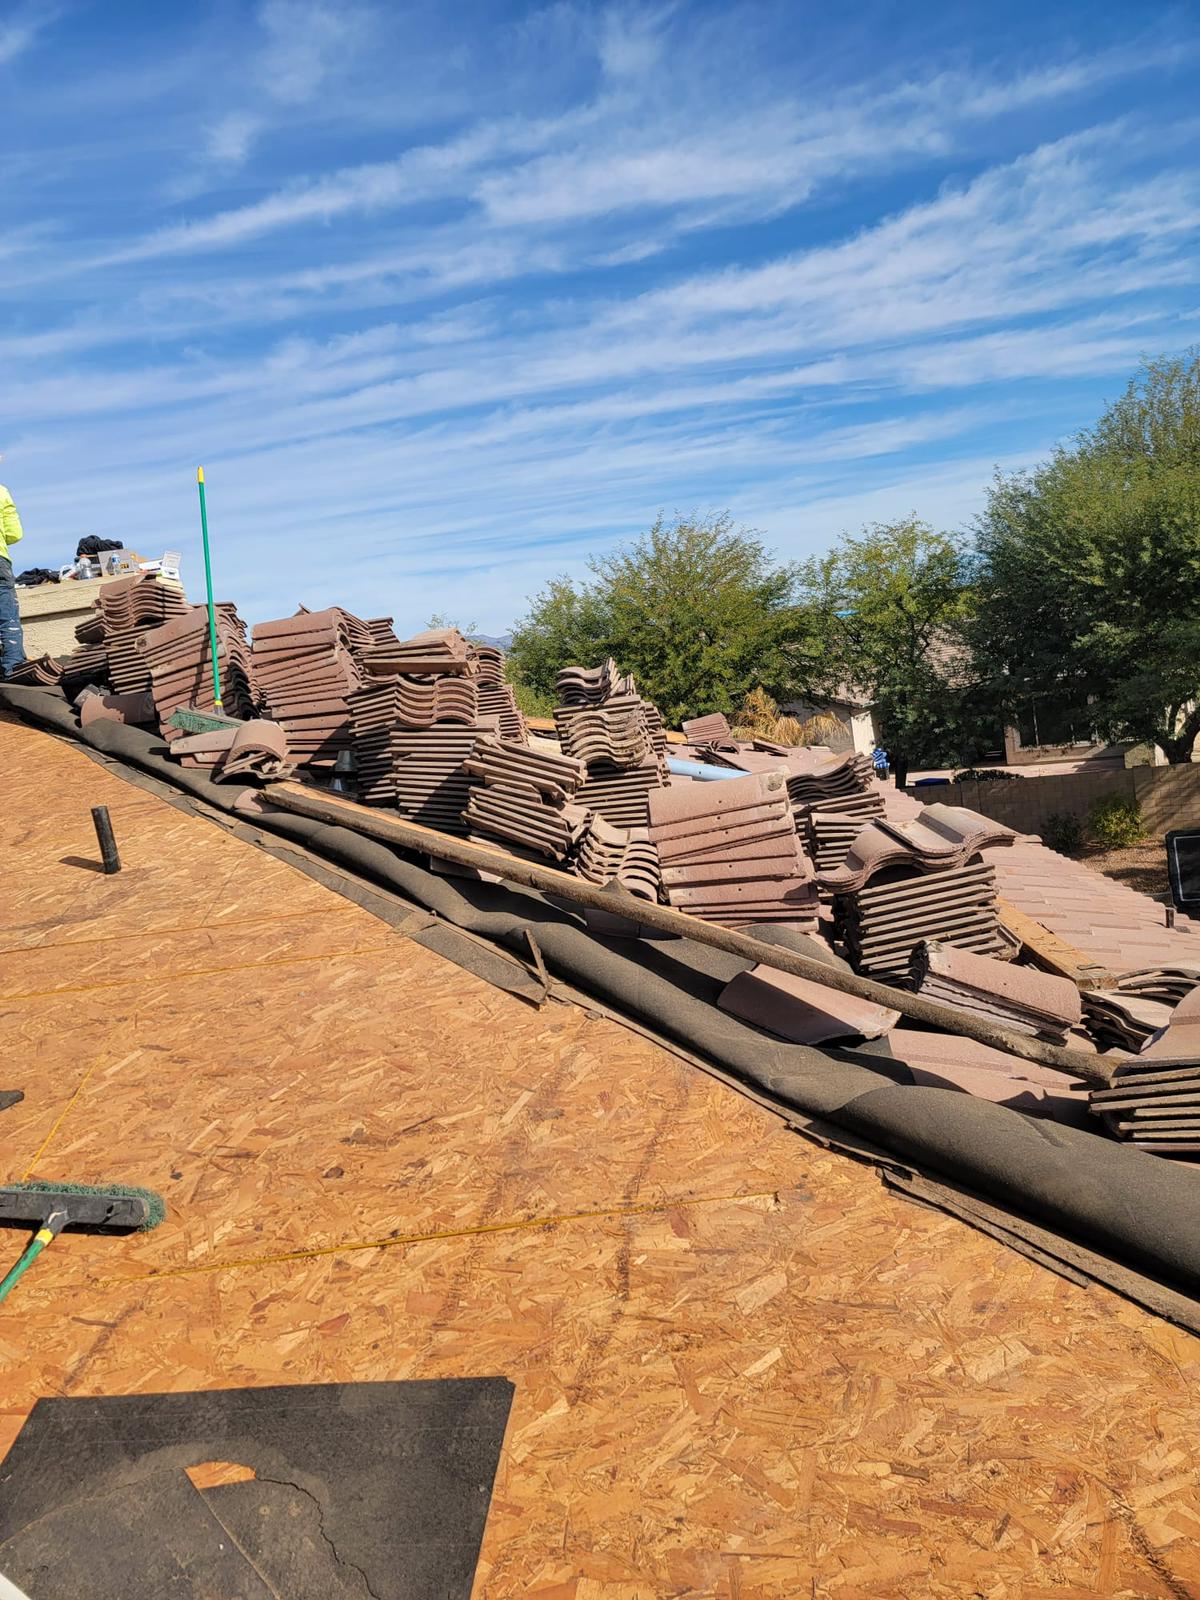 Stacks of roofing tiles ready for a quality re-felt by Behmer in Ironwood Village.